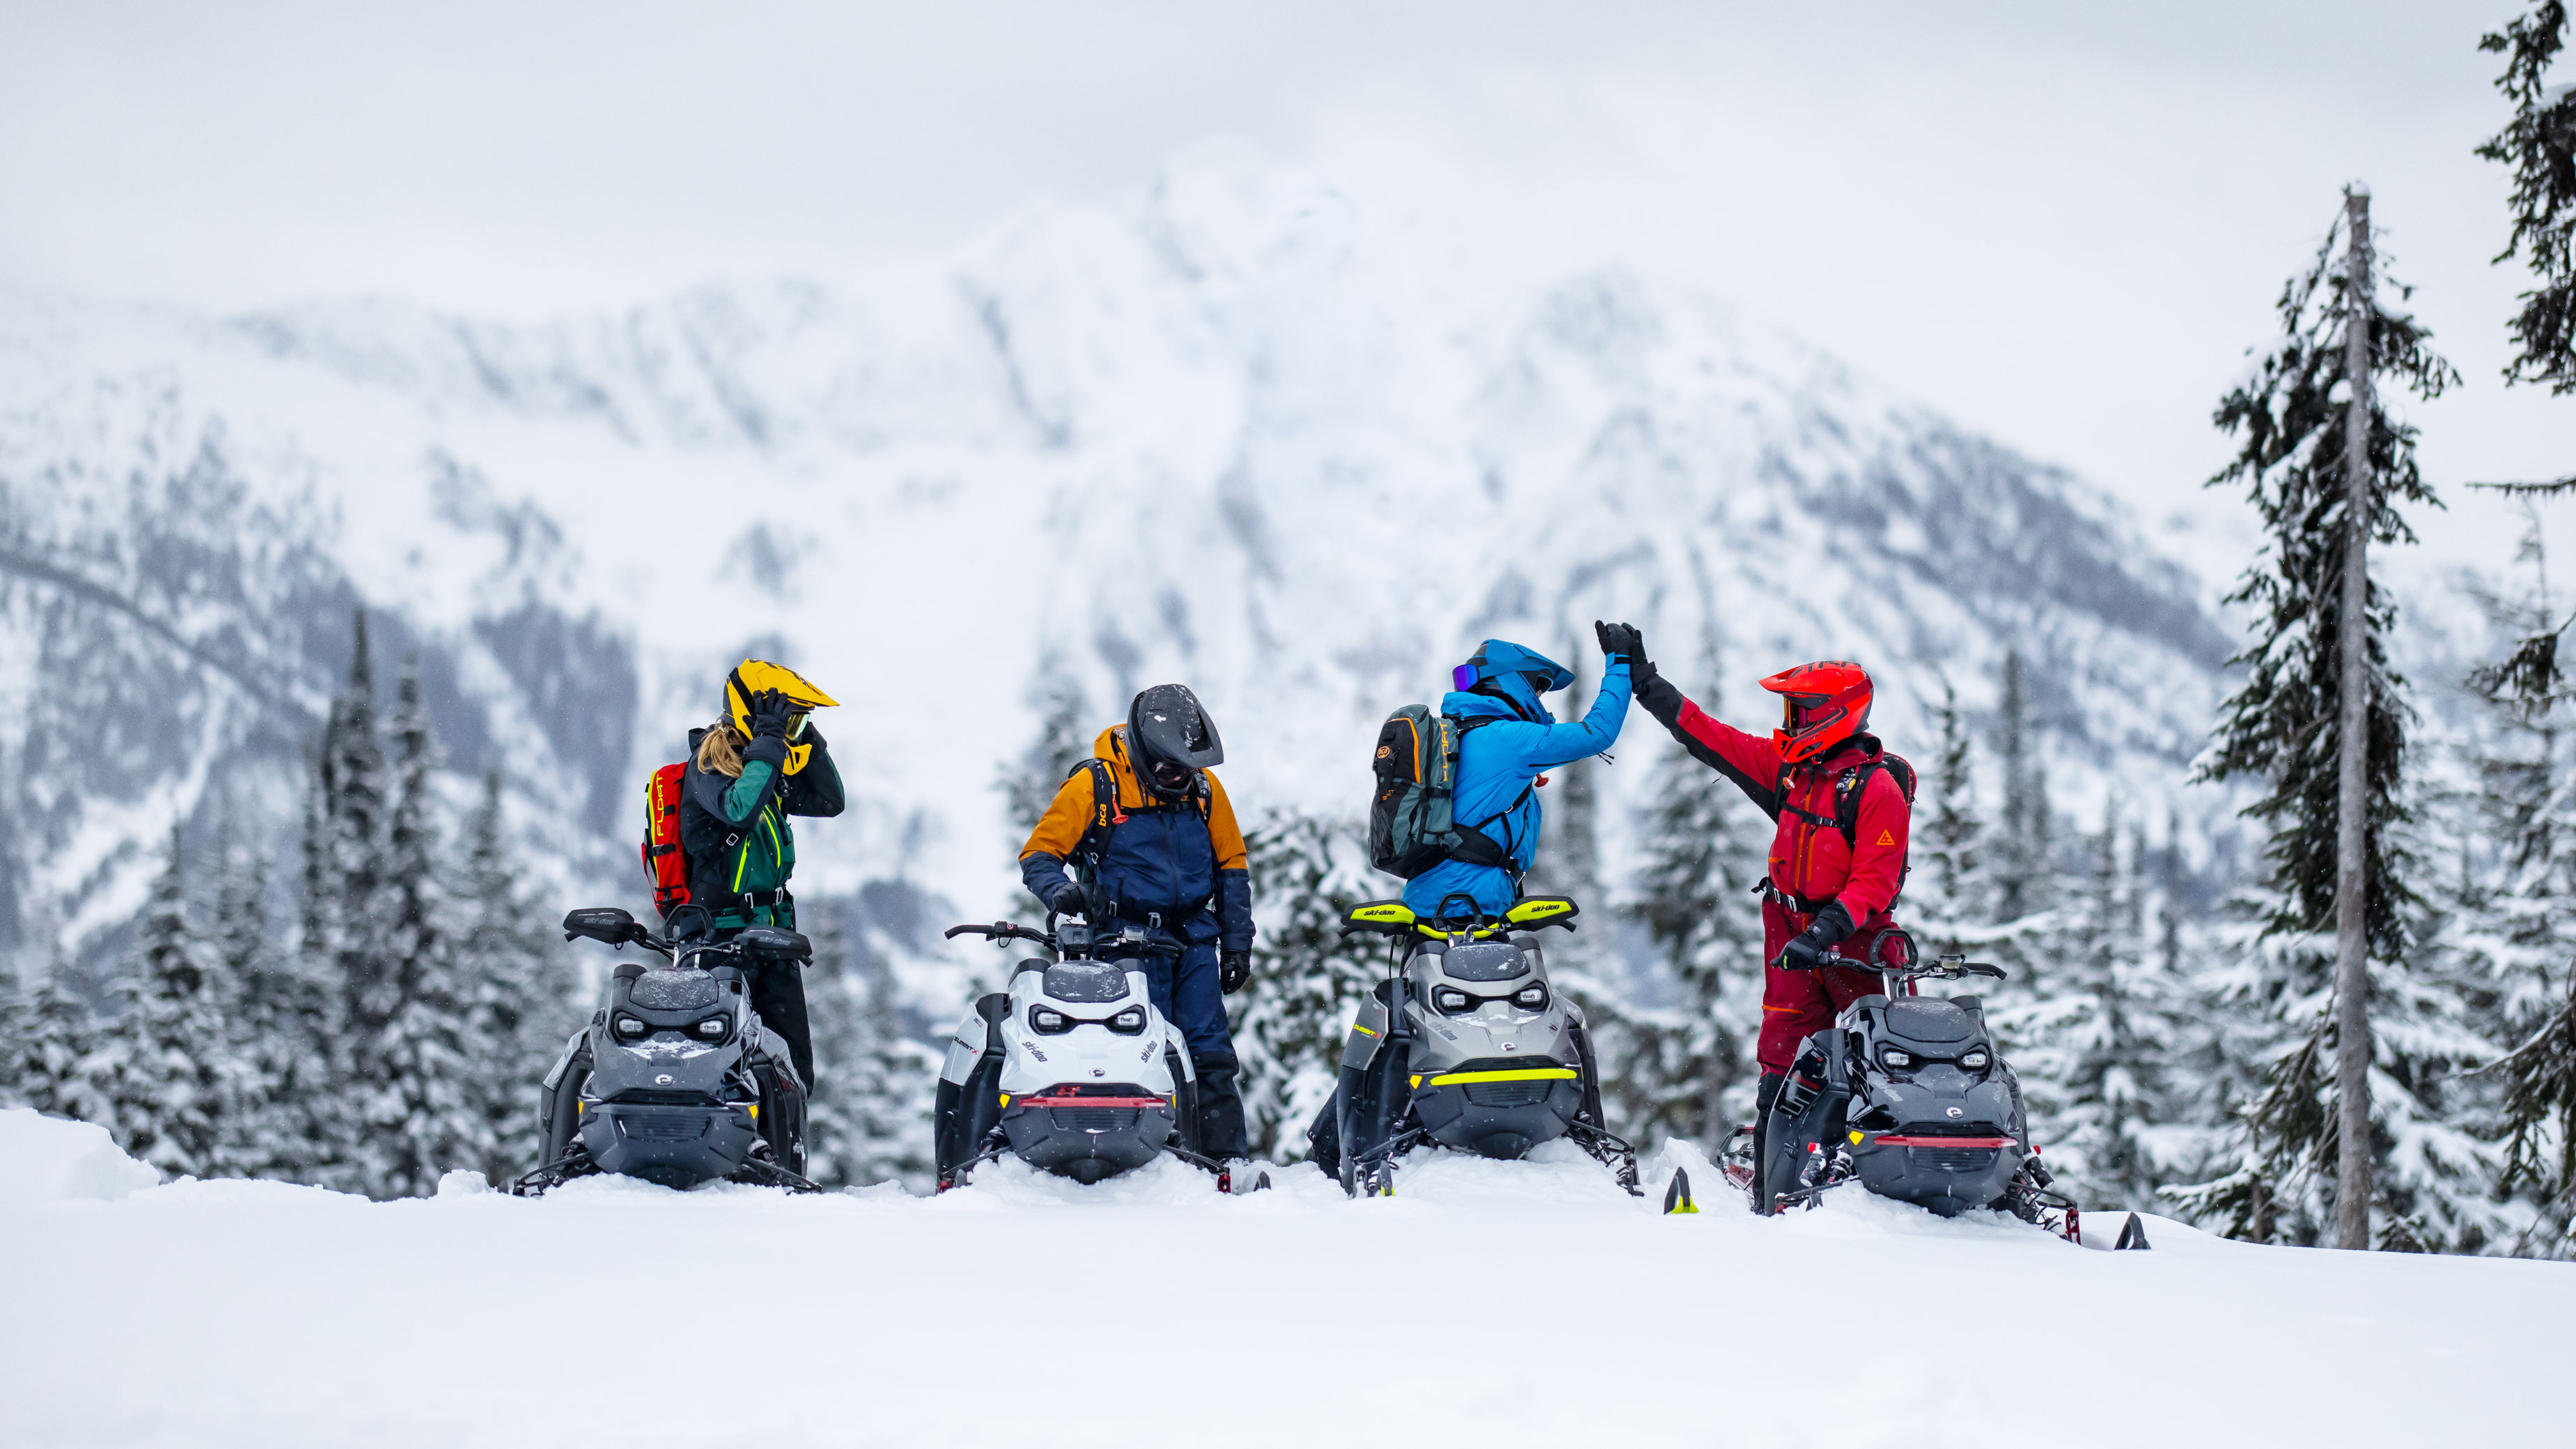 Riders before a snowmobile ride with Ski-Doo Mountain sled